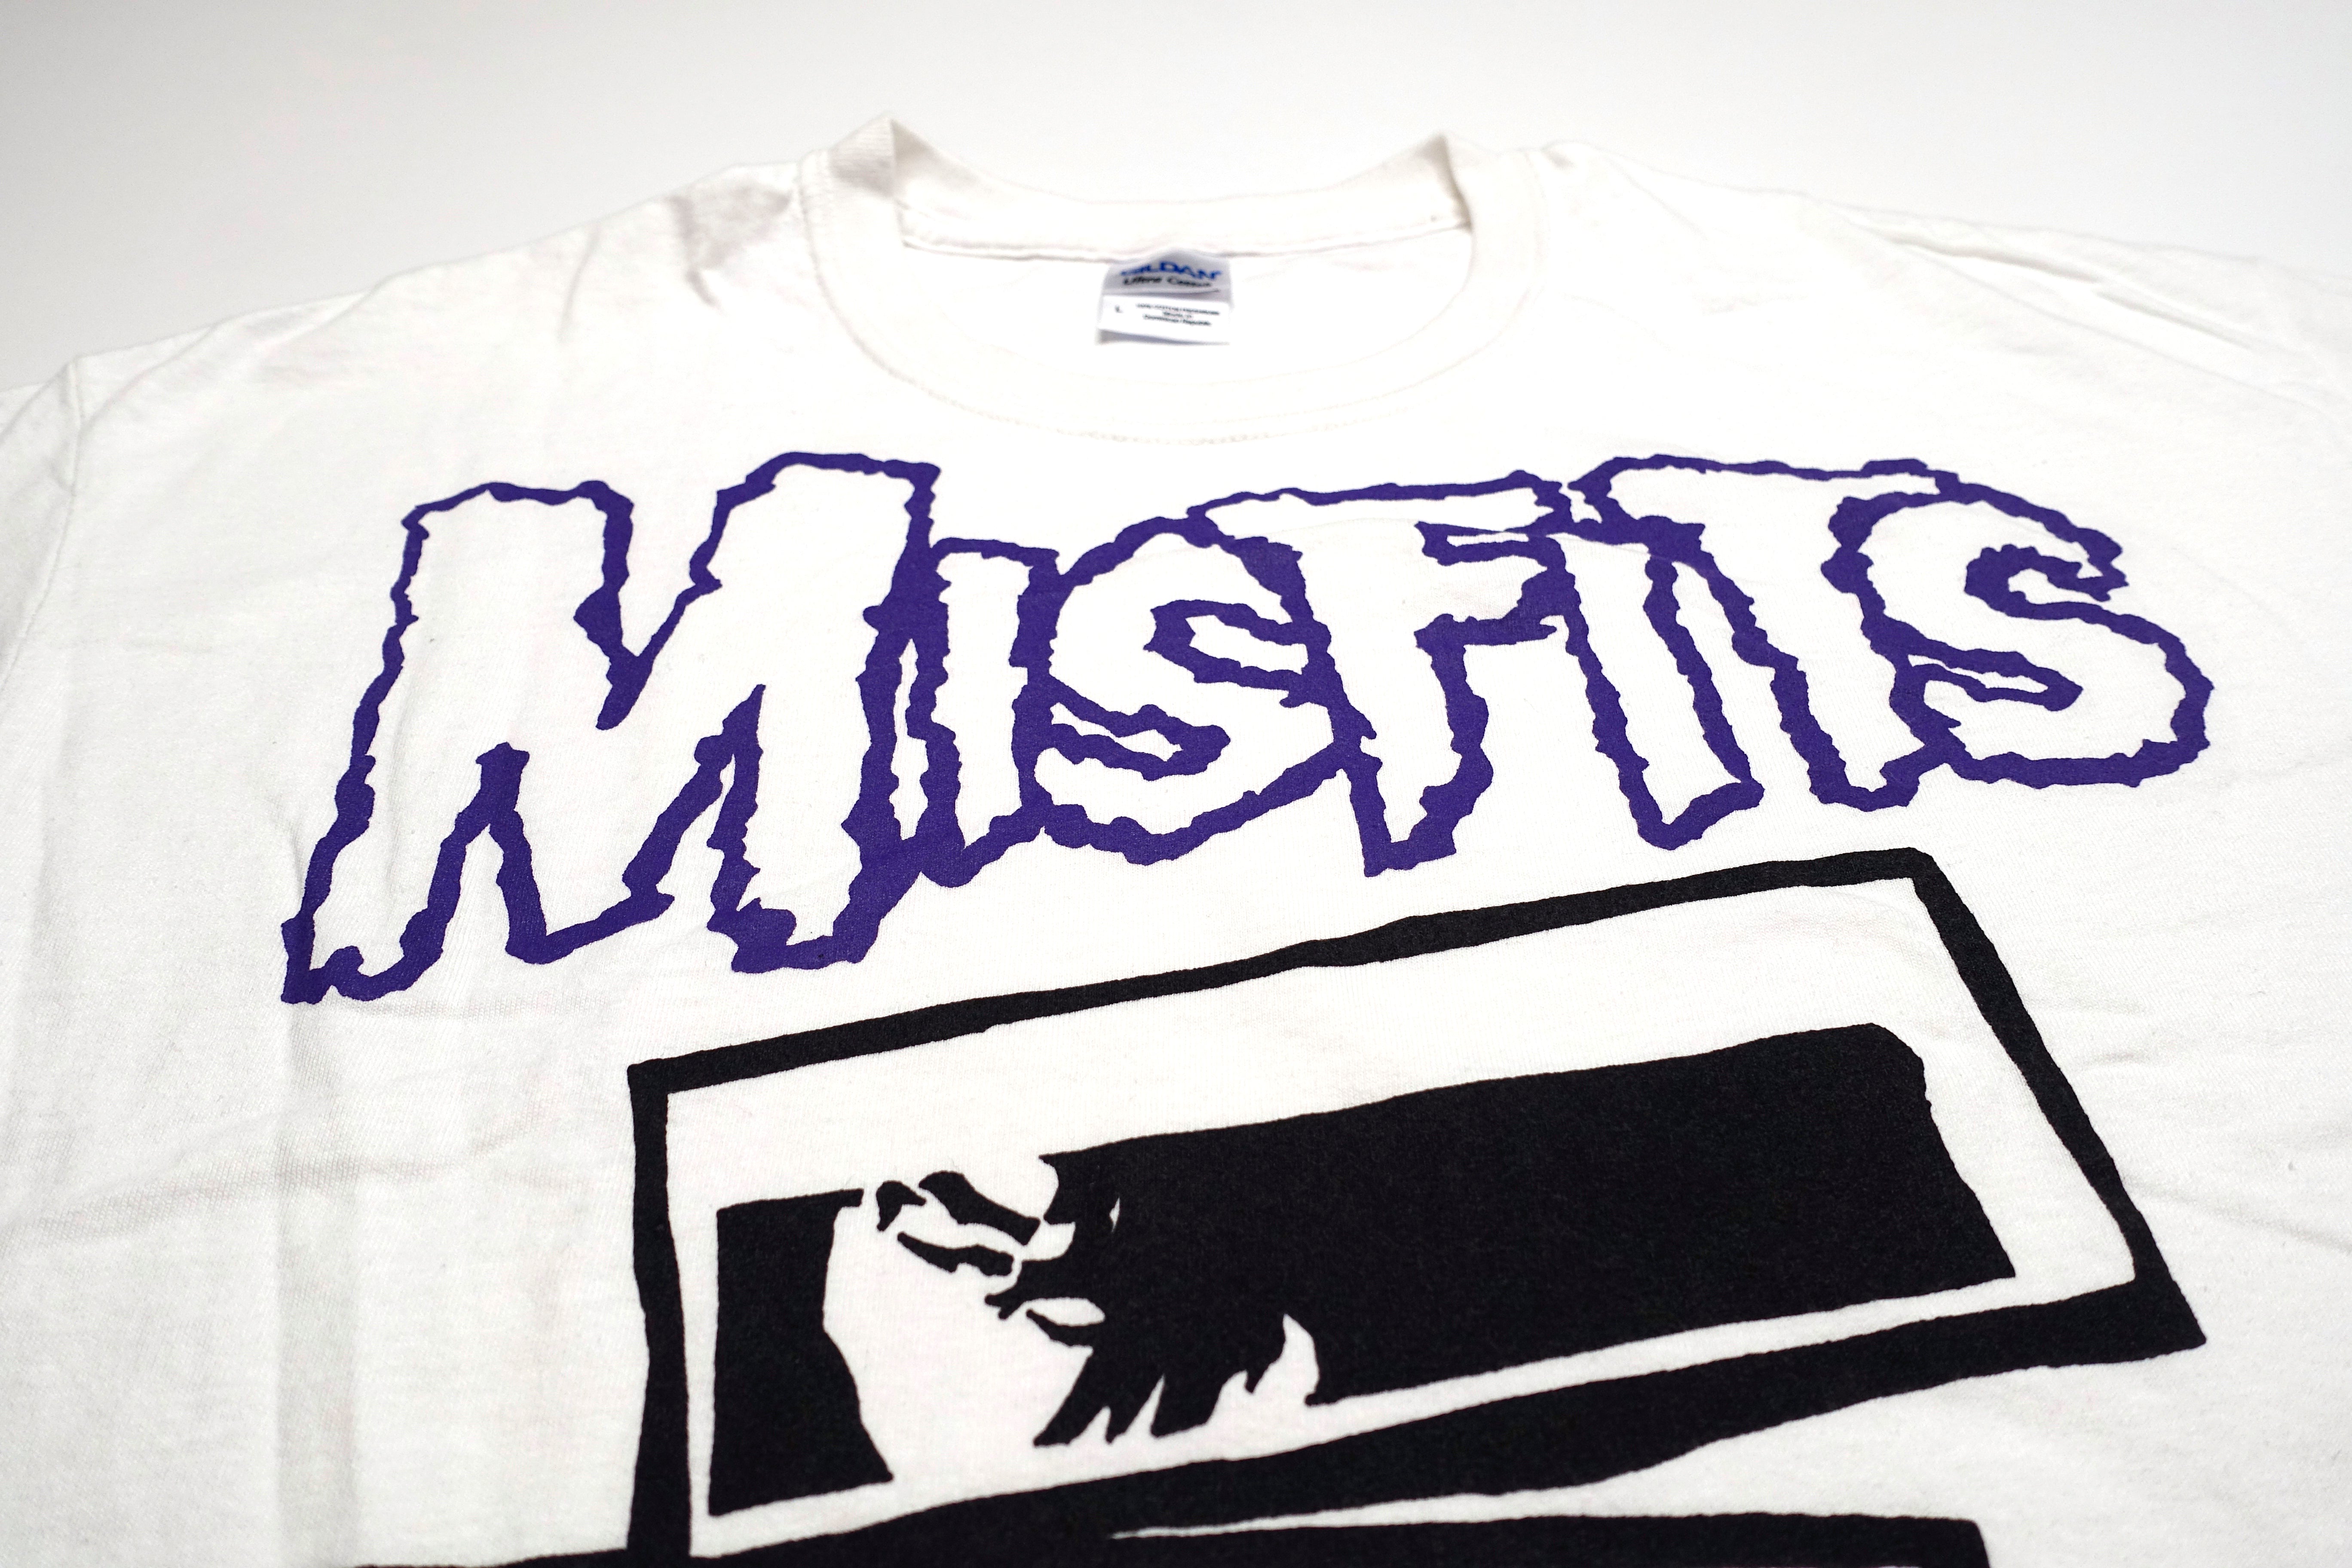 Misfits - 3 Hits From Hell Shirt Size Large (Bootleg / DIY)